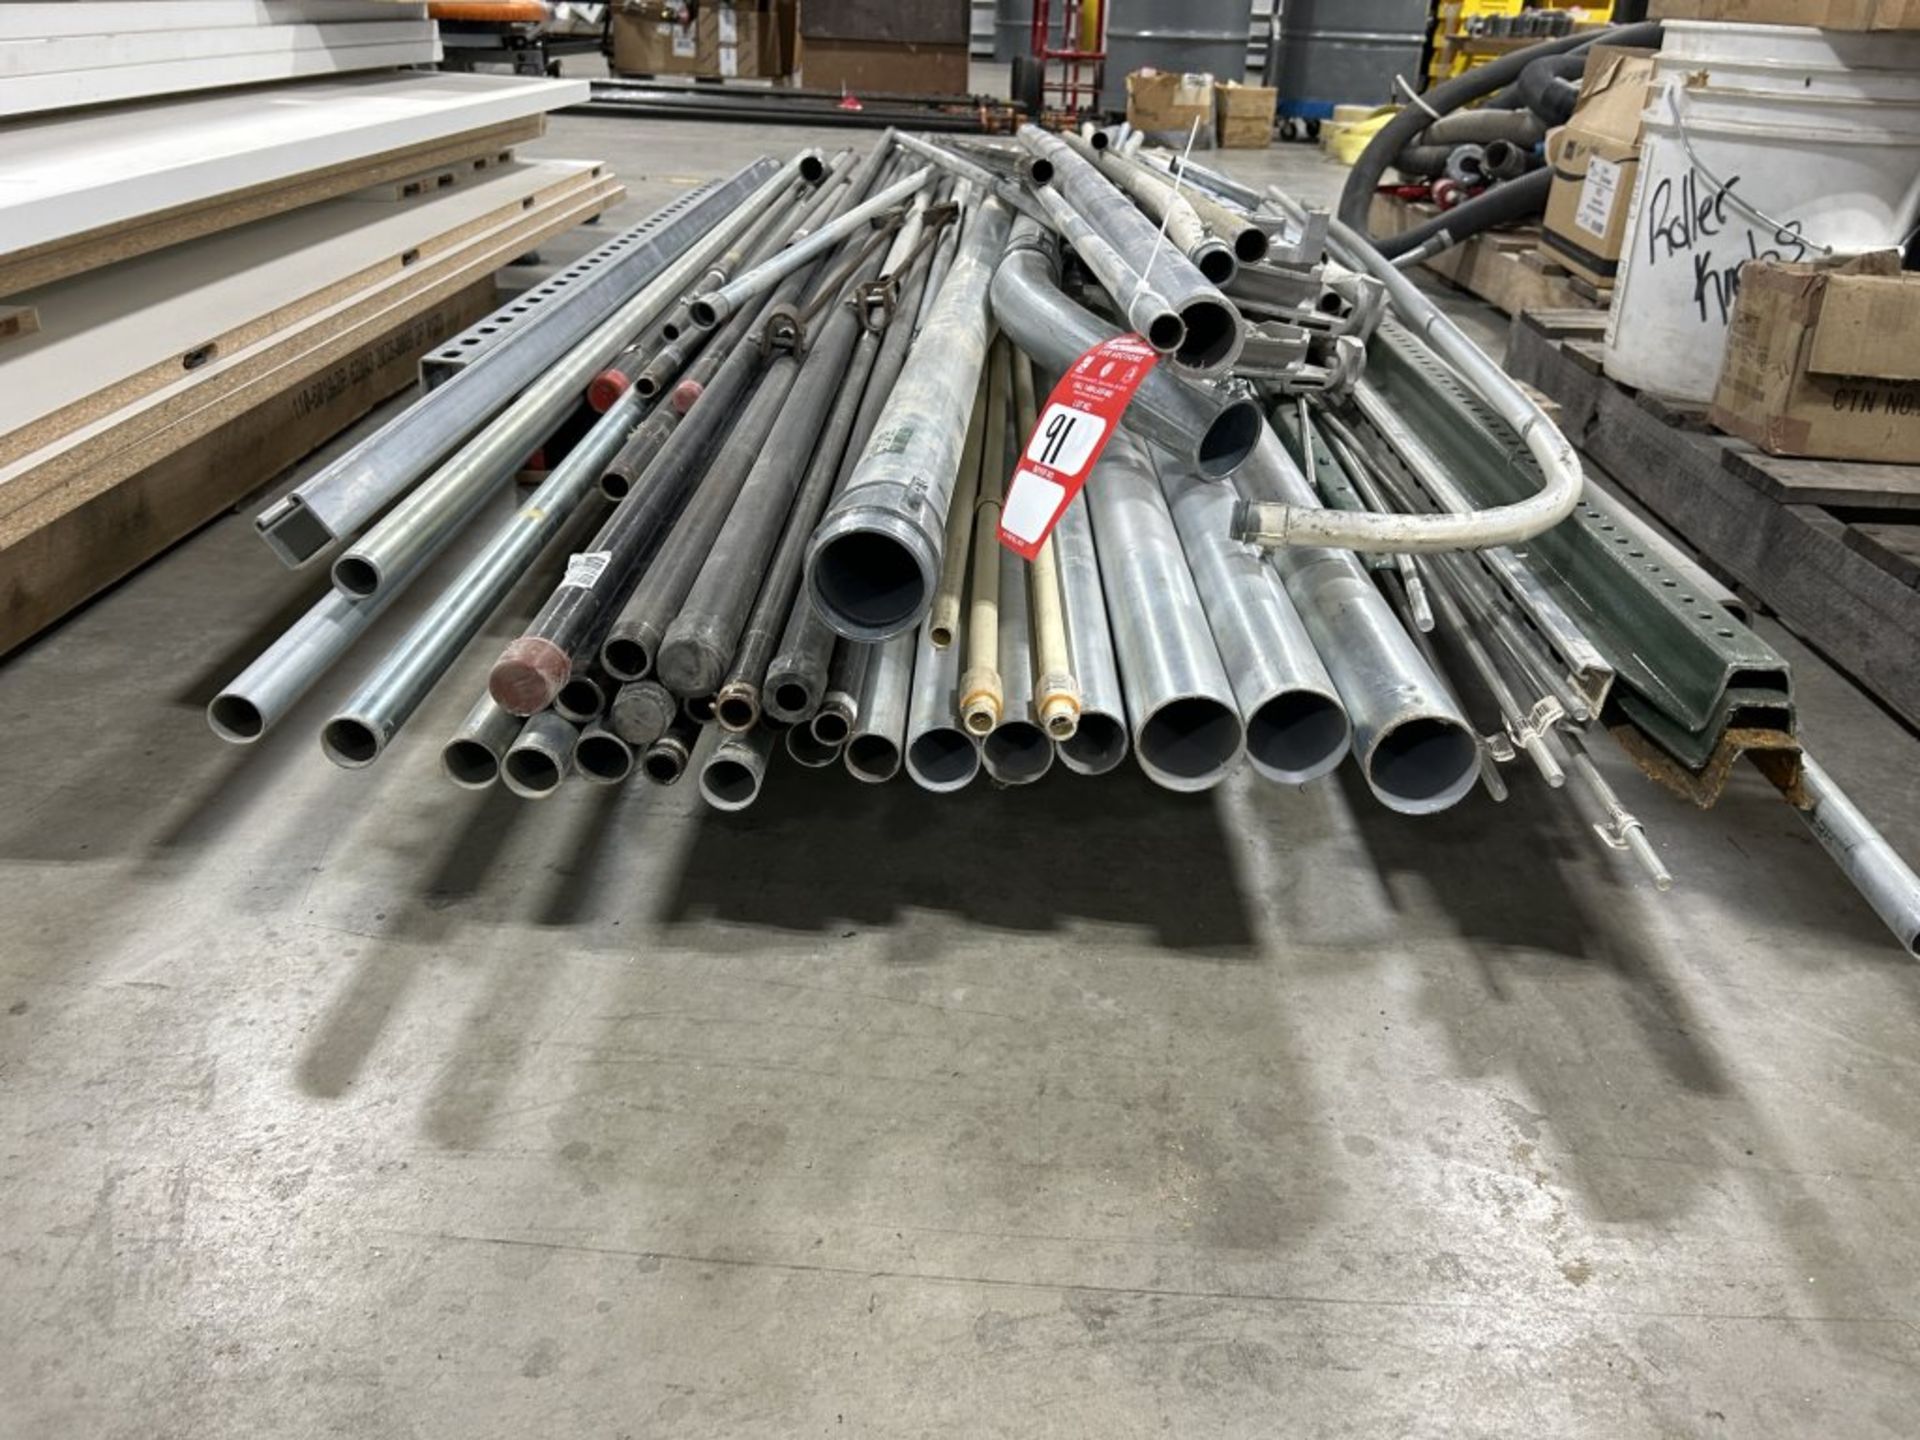 LARGE PILE OF ASSORTED CONDUIT BENDERS, CONDUIT, METAL PIPES, T-POSTS, ETC. - Image 3 of 5